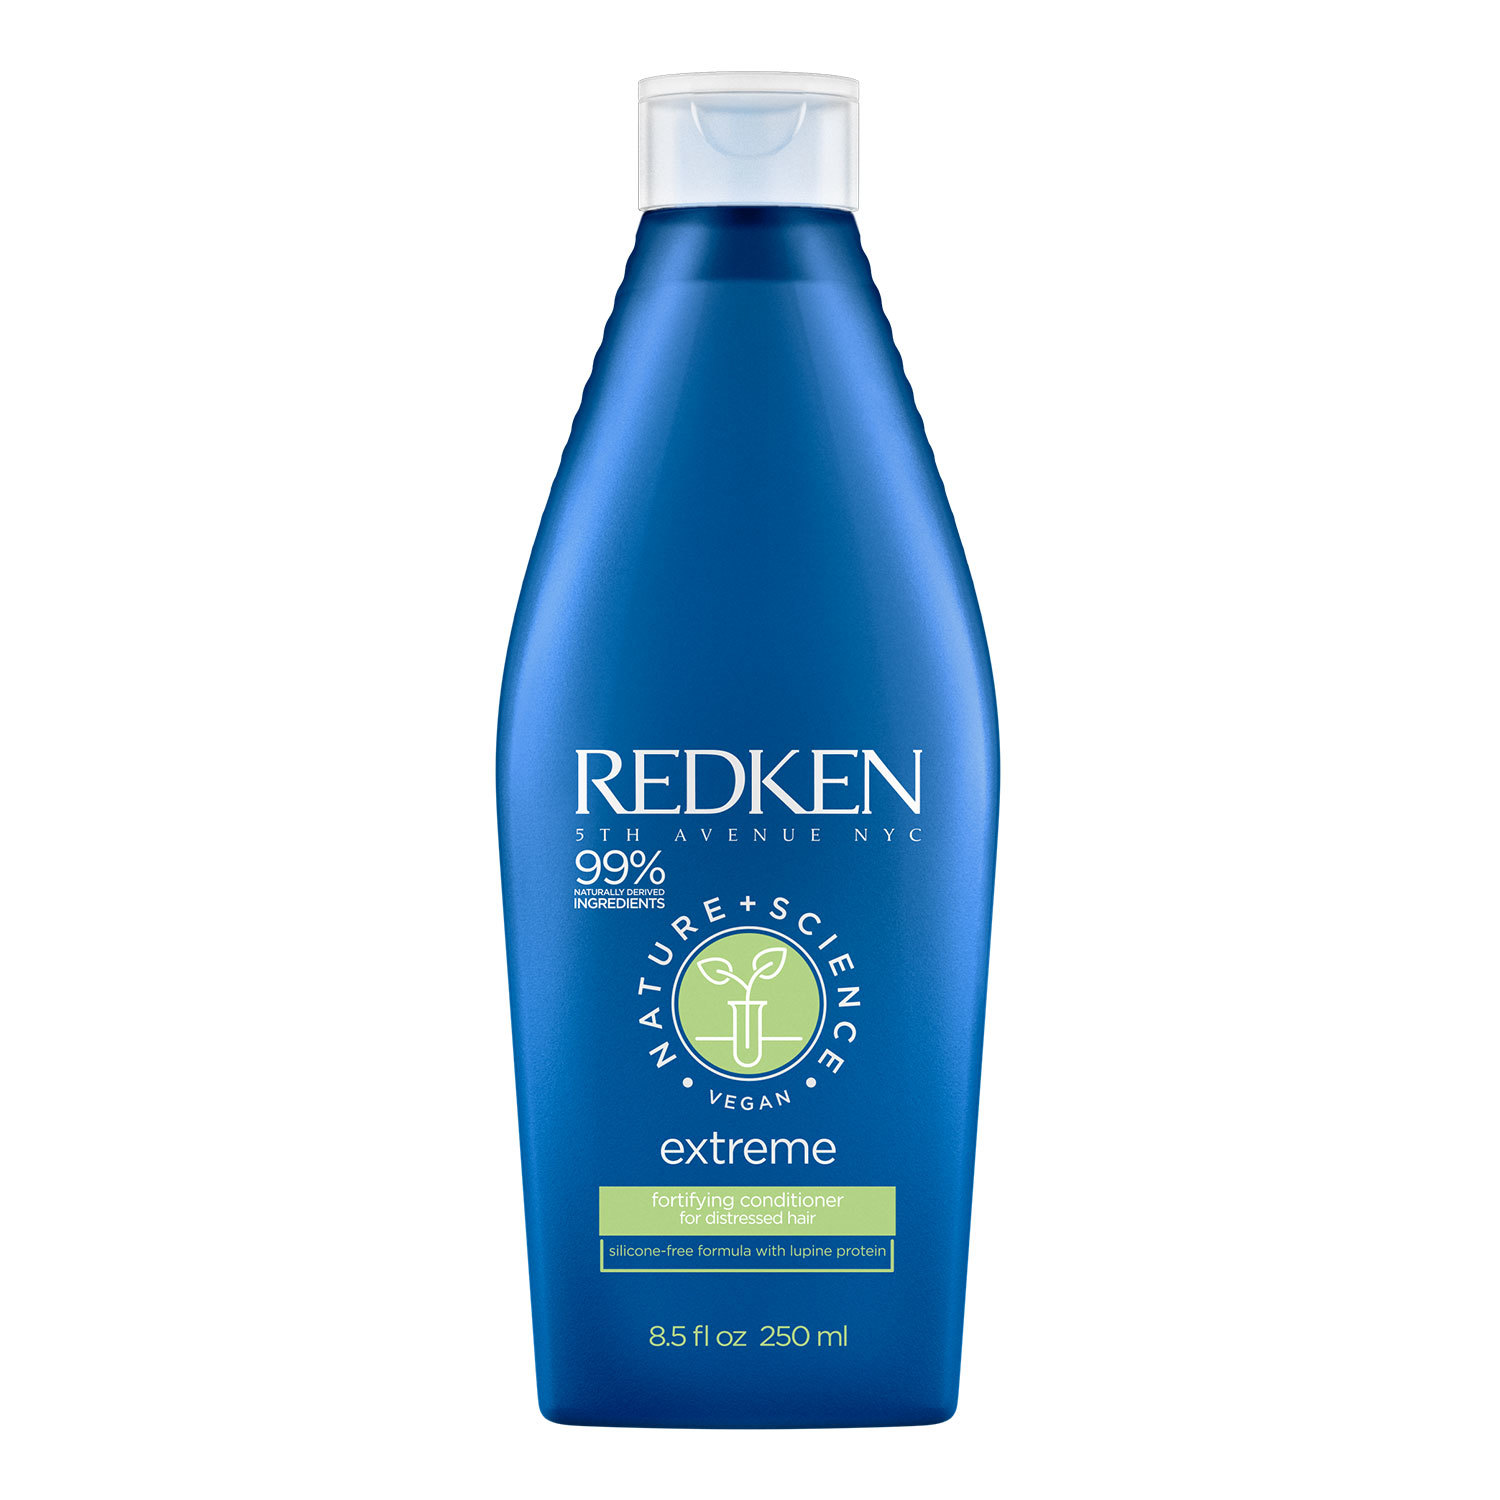 Retina eaff70288e26f738d87f 7ab057db8a4ab568b655 redken 2018 nature science extreme retail conditioner na rgb